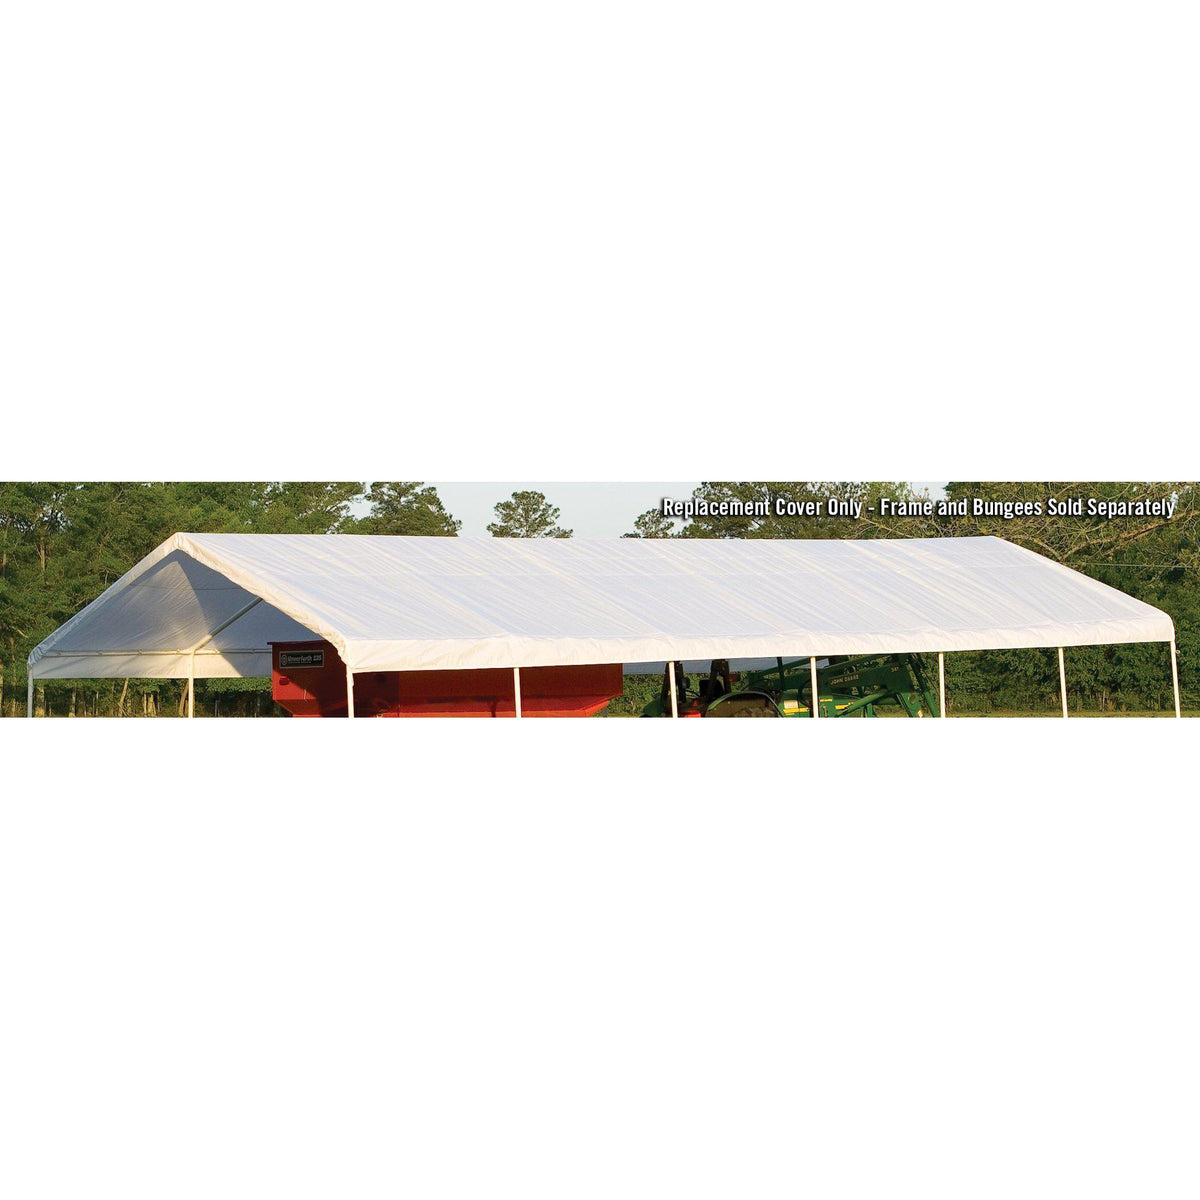 ShelterLogic SuperMax Canopy Replacement Cover